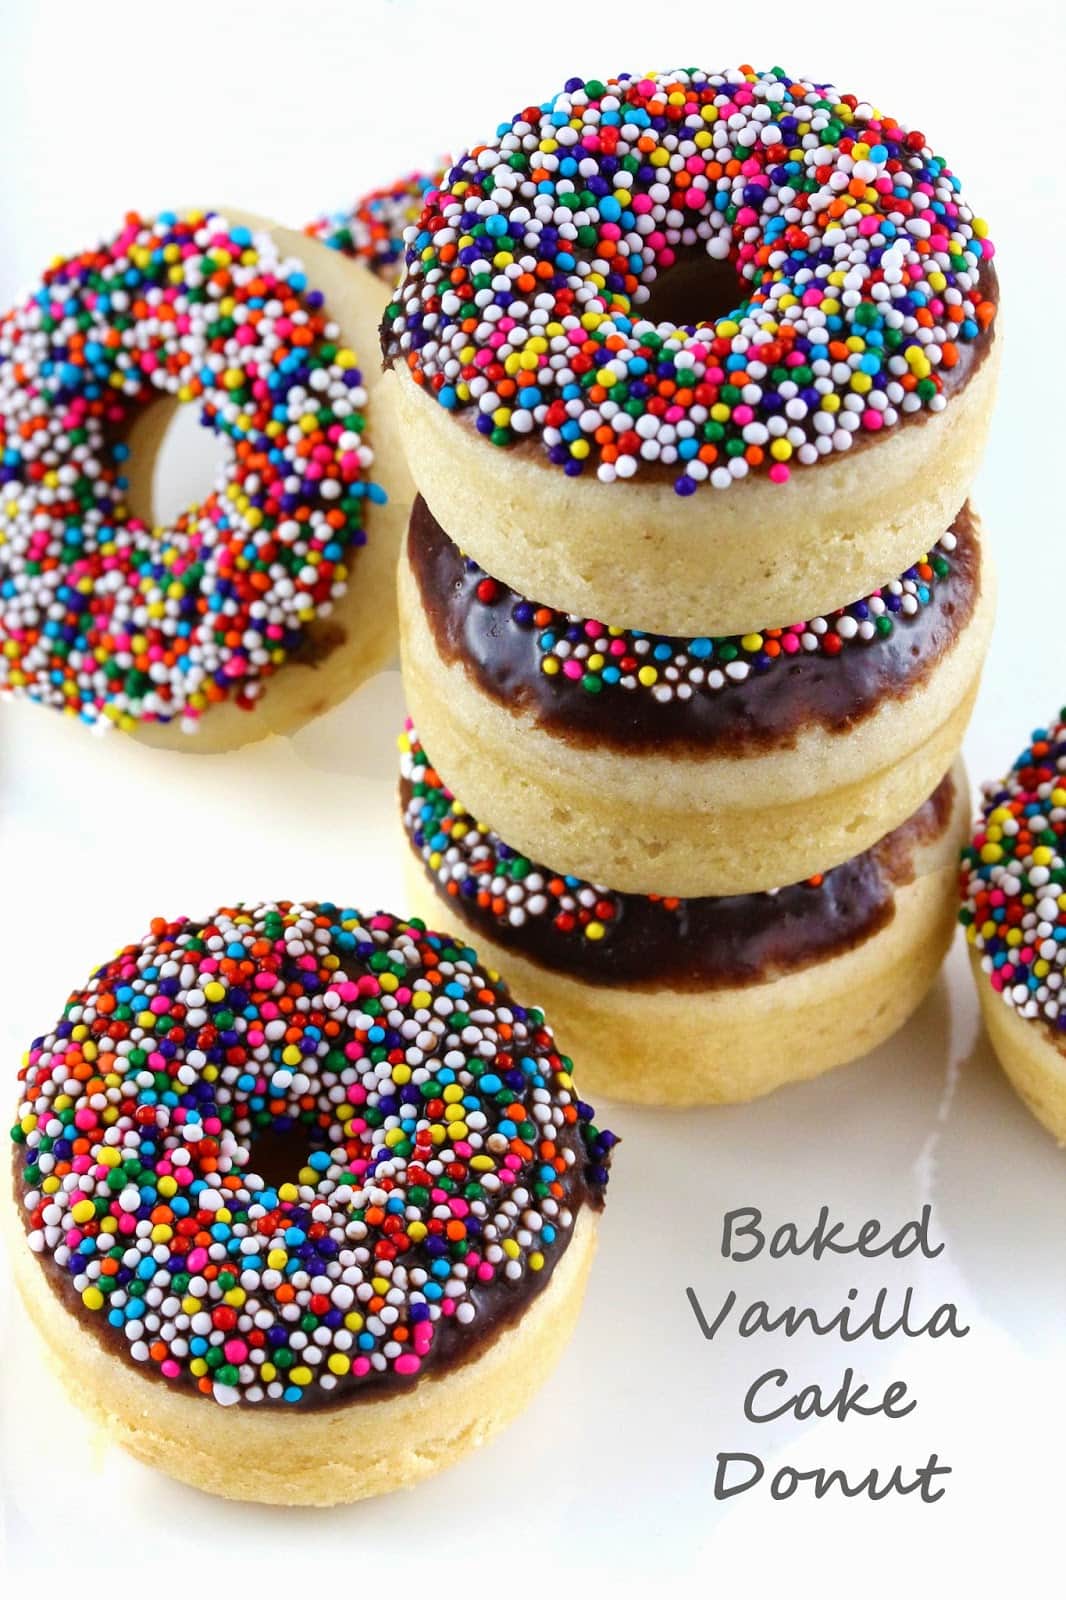 Baked Vanilla Cake Donuts with Chocolate Glaze and Sprinkles